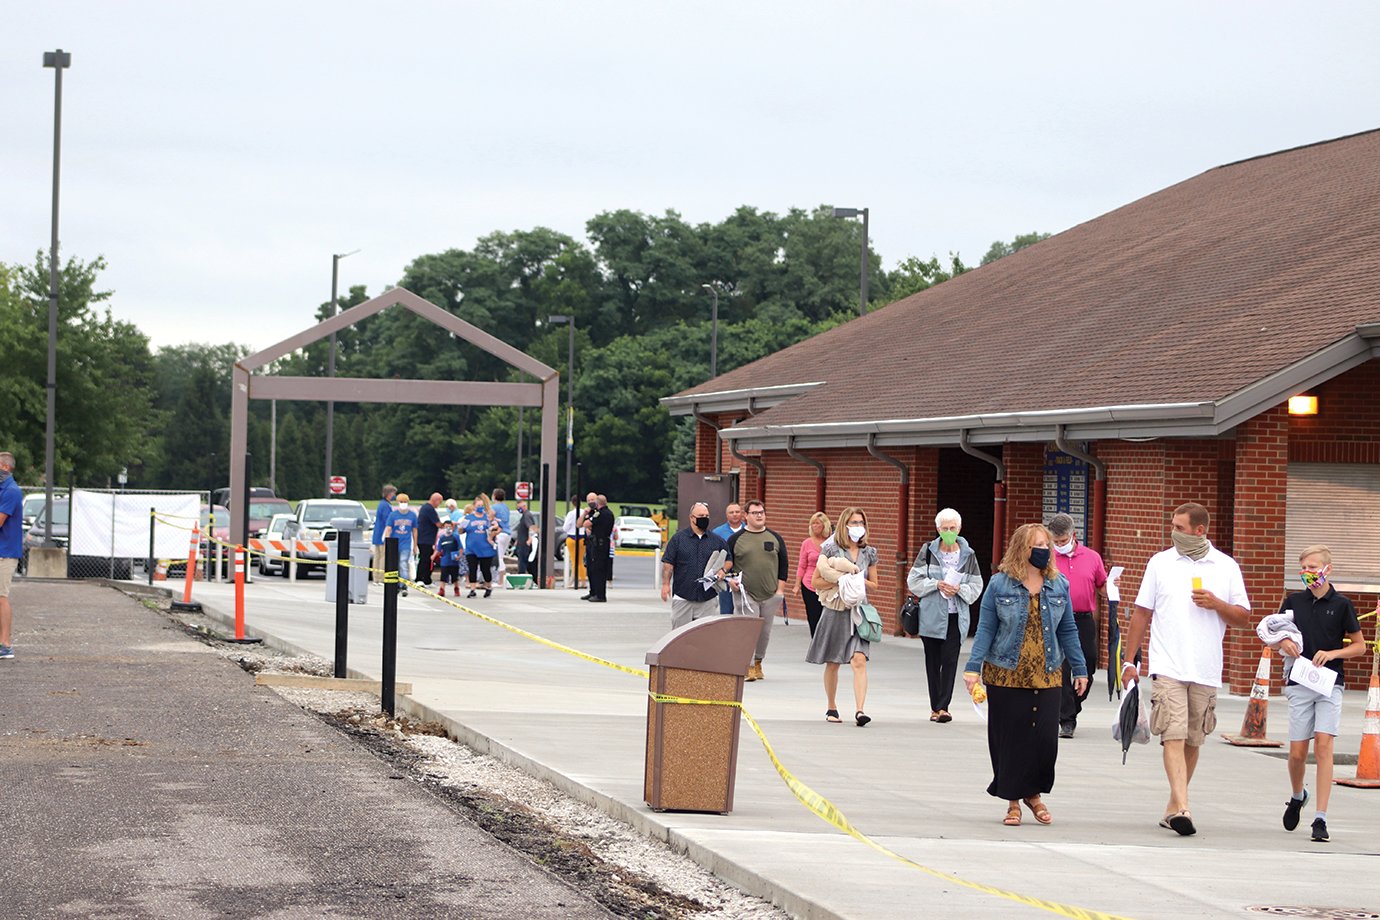 Crowds pour into the friendly confines of the Crawfordsville High School football stadium in the minutes leading up to the already-postponed ceremony under threat of rain.